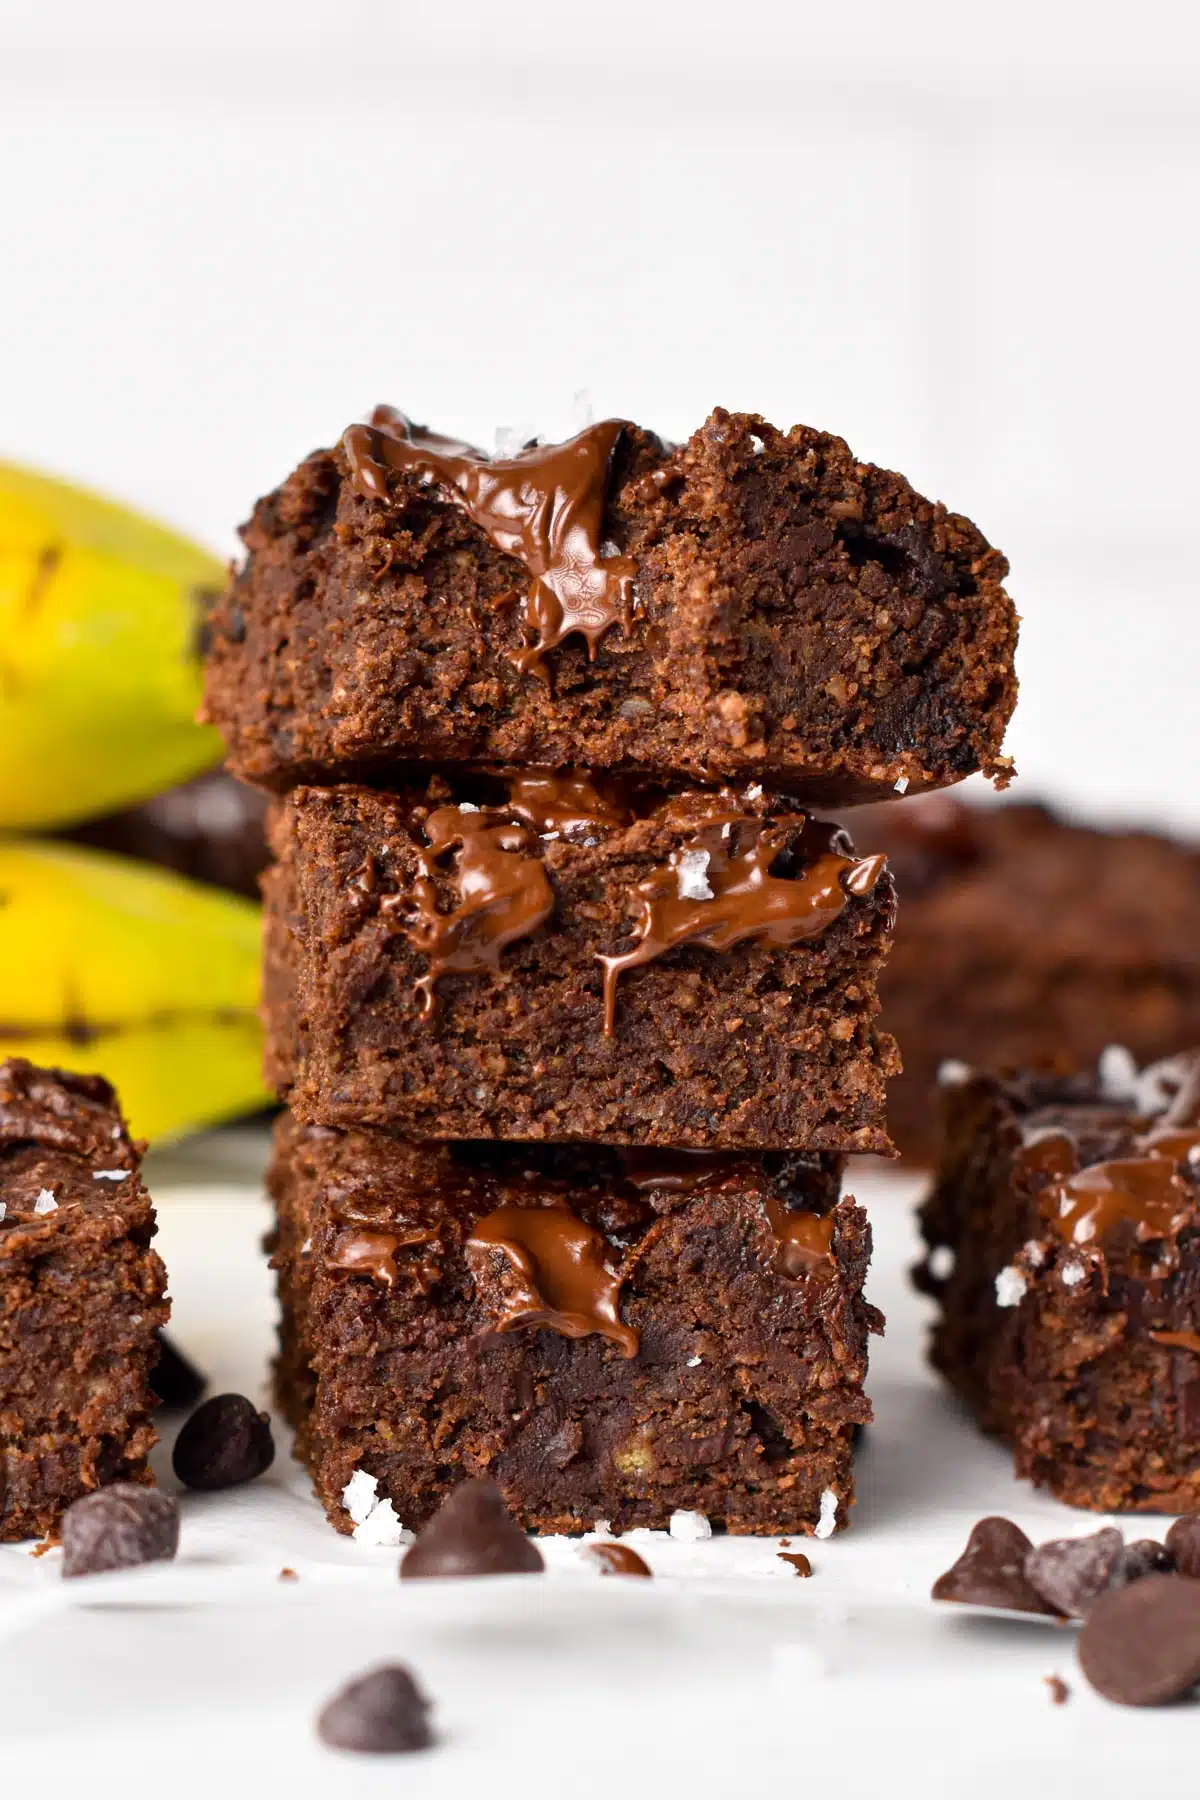 These Healthy Banana Brownies are  the most delicious fudgy brownies made with wholesome ingredients. Plus, they are naturally vegan, dairy-free and nut-free so you can share with all your family and friends.These Healthy Banana Brownies are  the most delicious fudgy brownies made with wholesome ingredients. Plus, they are naturally vegan, dairy-free and nut-free so you can share with all your family and friends.